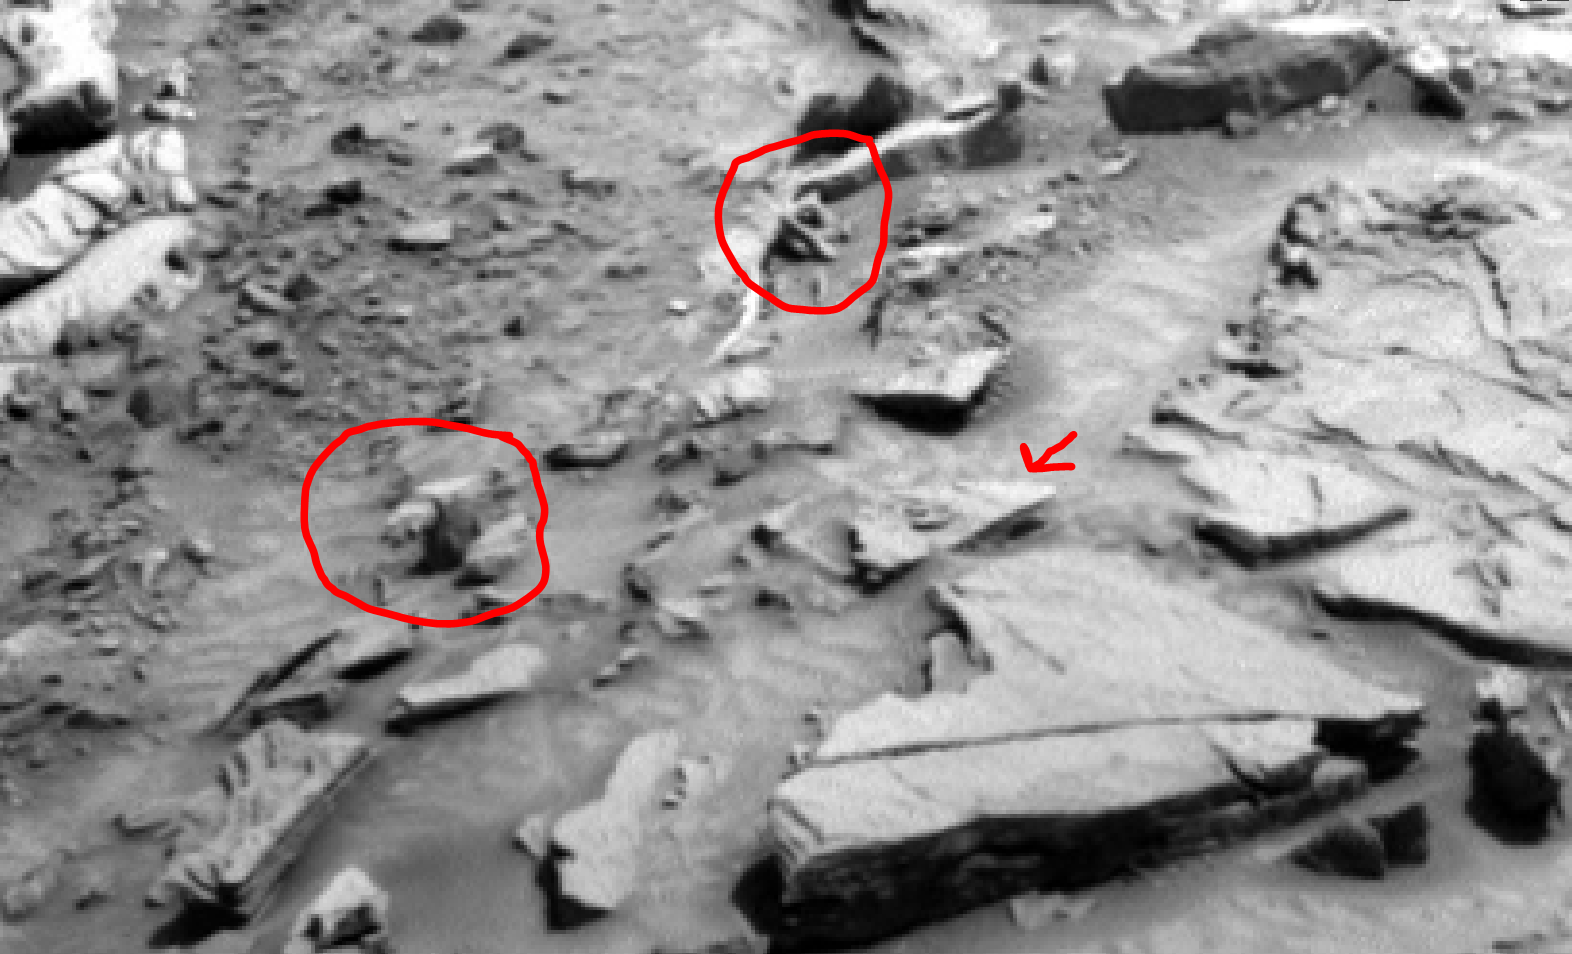 mars sol 1342 anomaly-artifacts 1a was life on mars